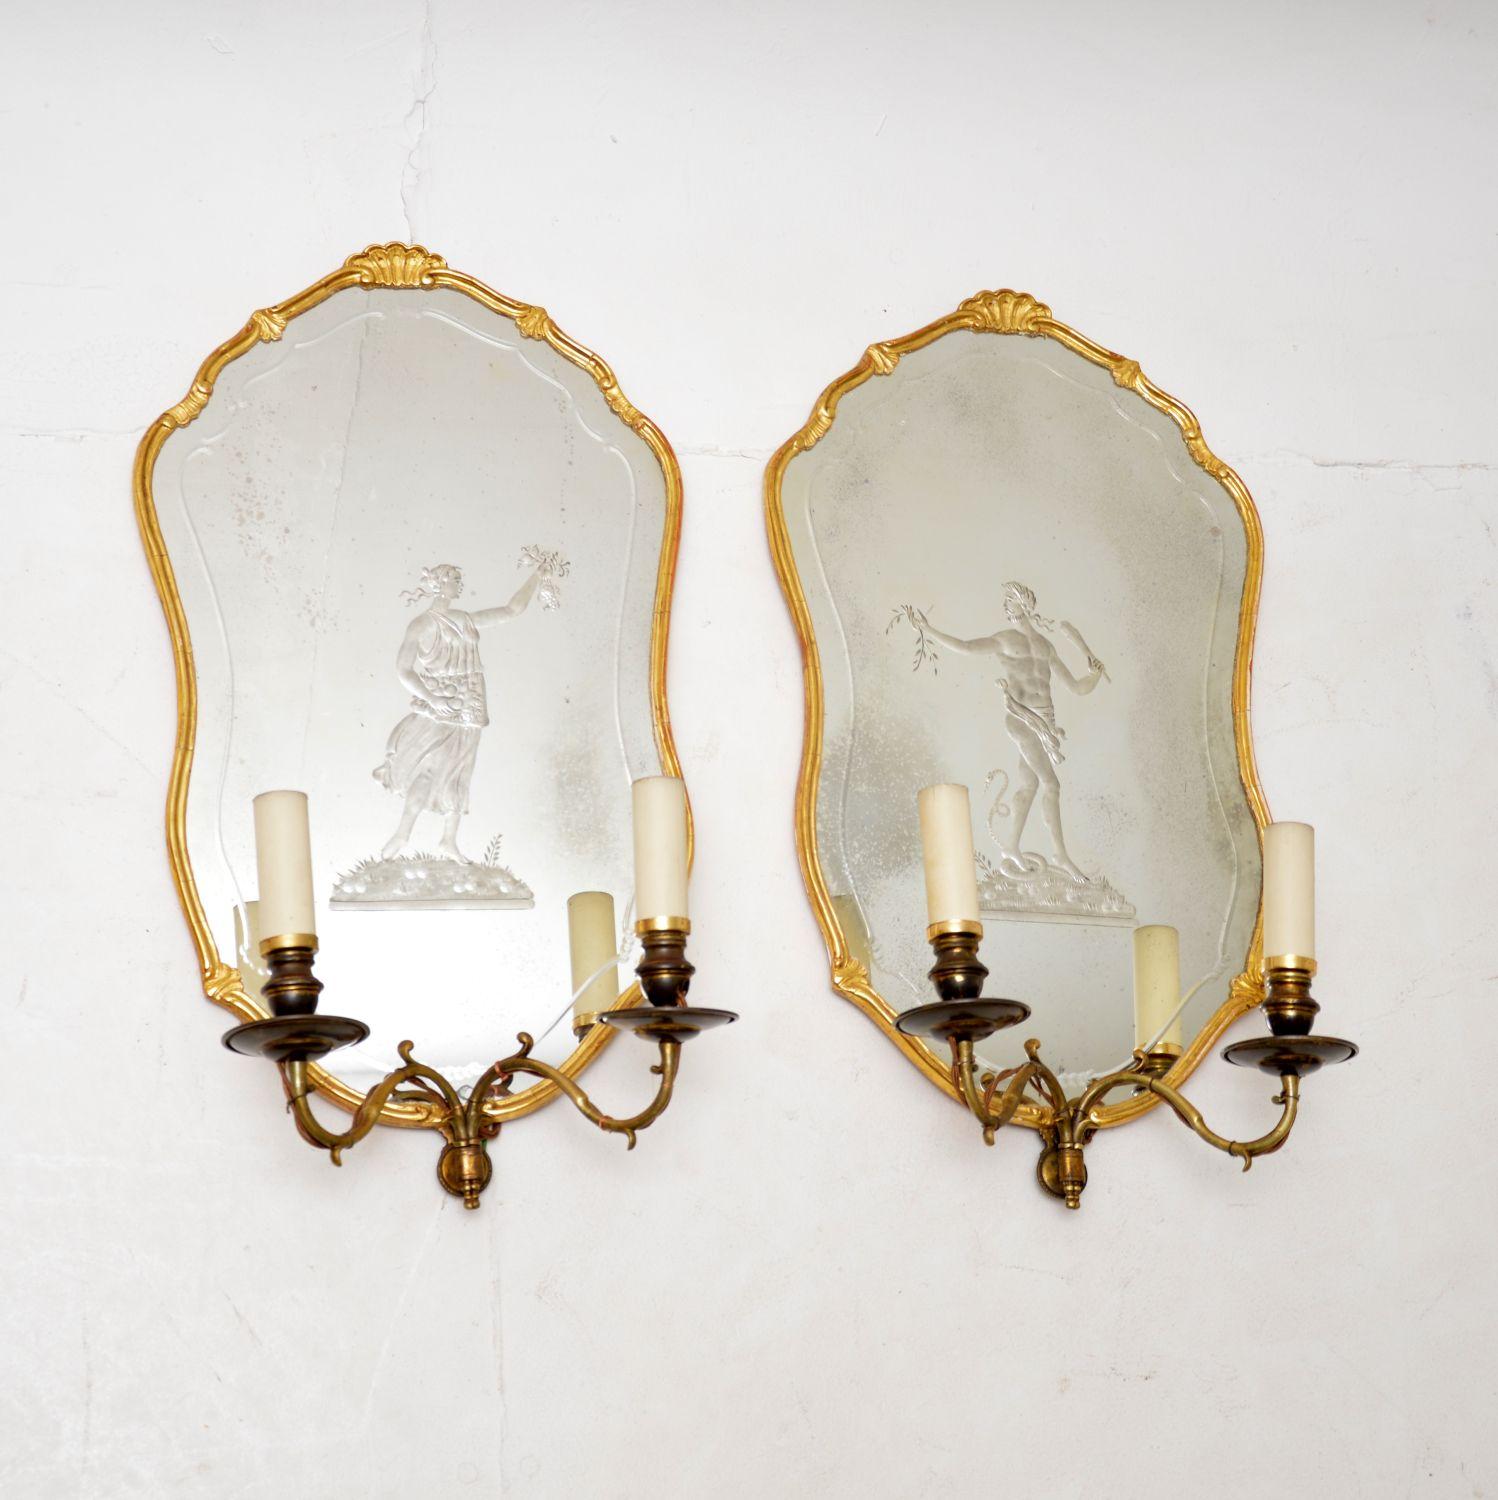 An exquisite pair of antique gilt wood mirrors with wall sconce lamps built in. We believe these are French, dating from around the 1880-1900 period.

The quality is outstanding, the gilt wood frames have a beautiful, delicate design and the